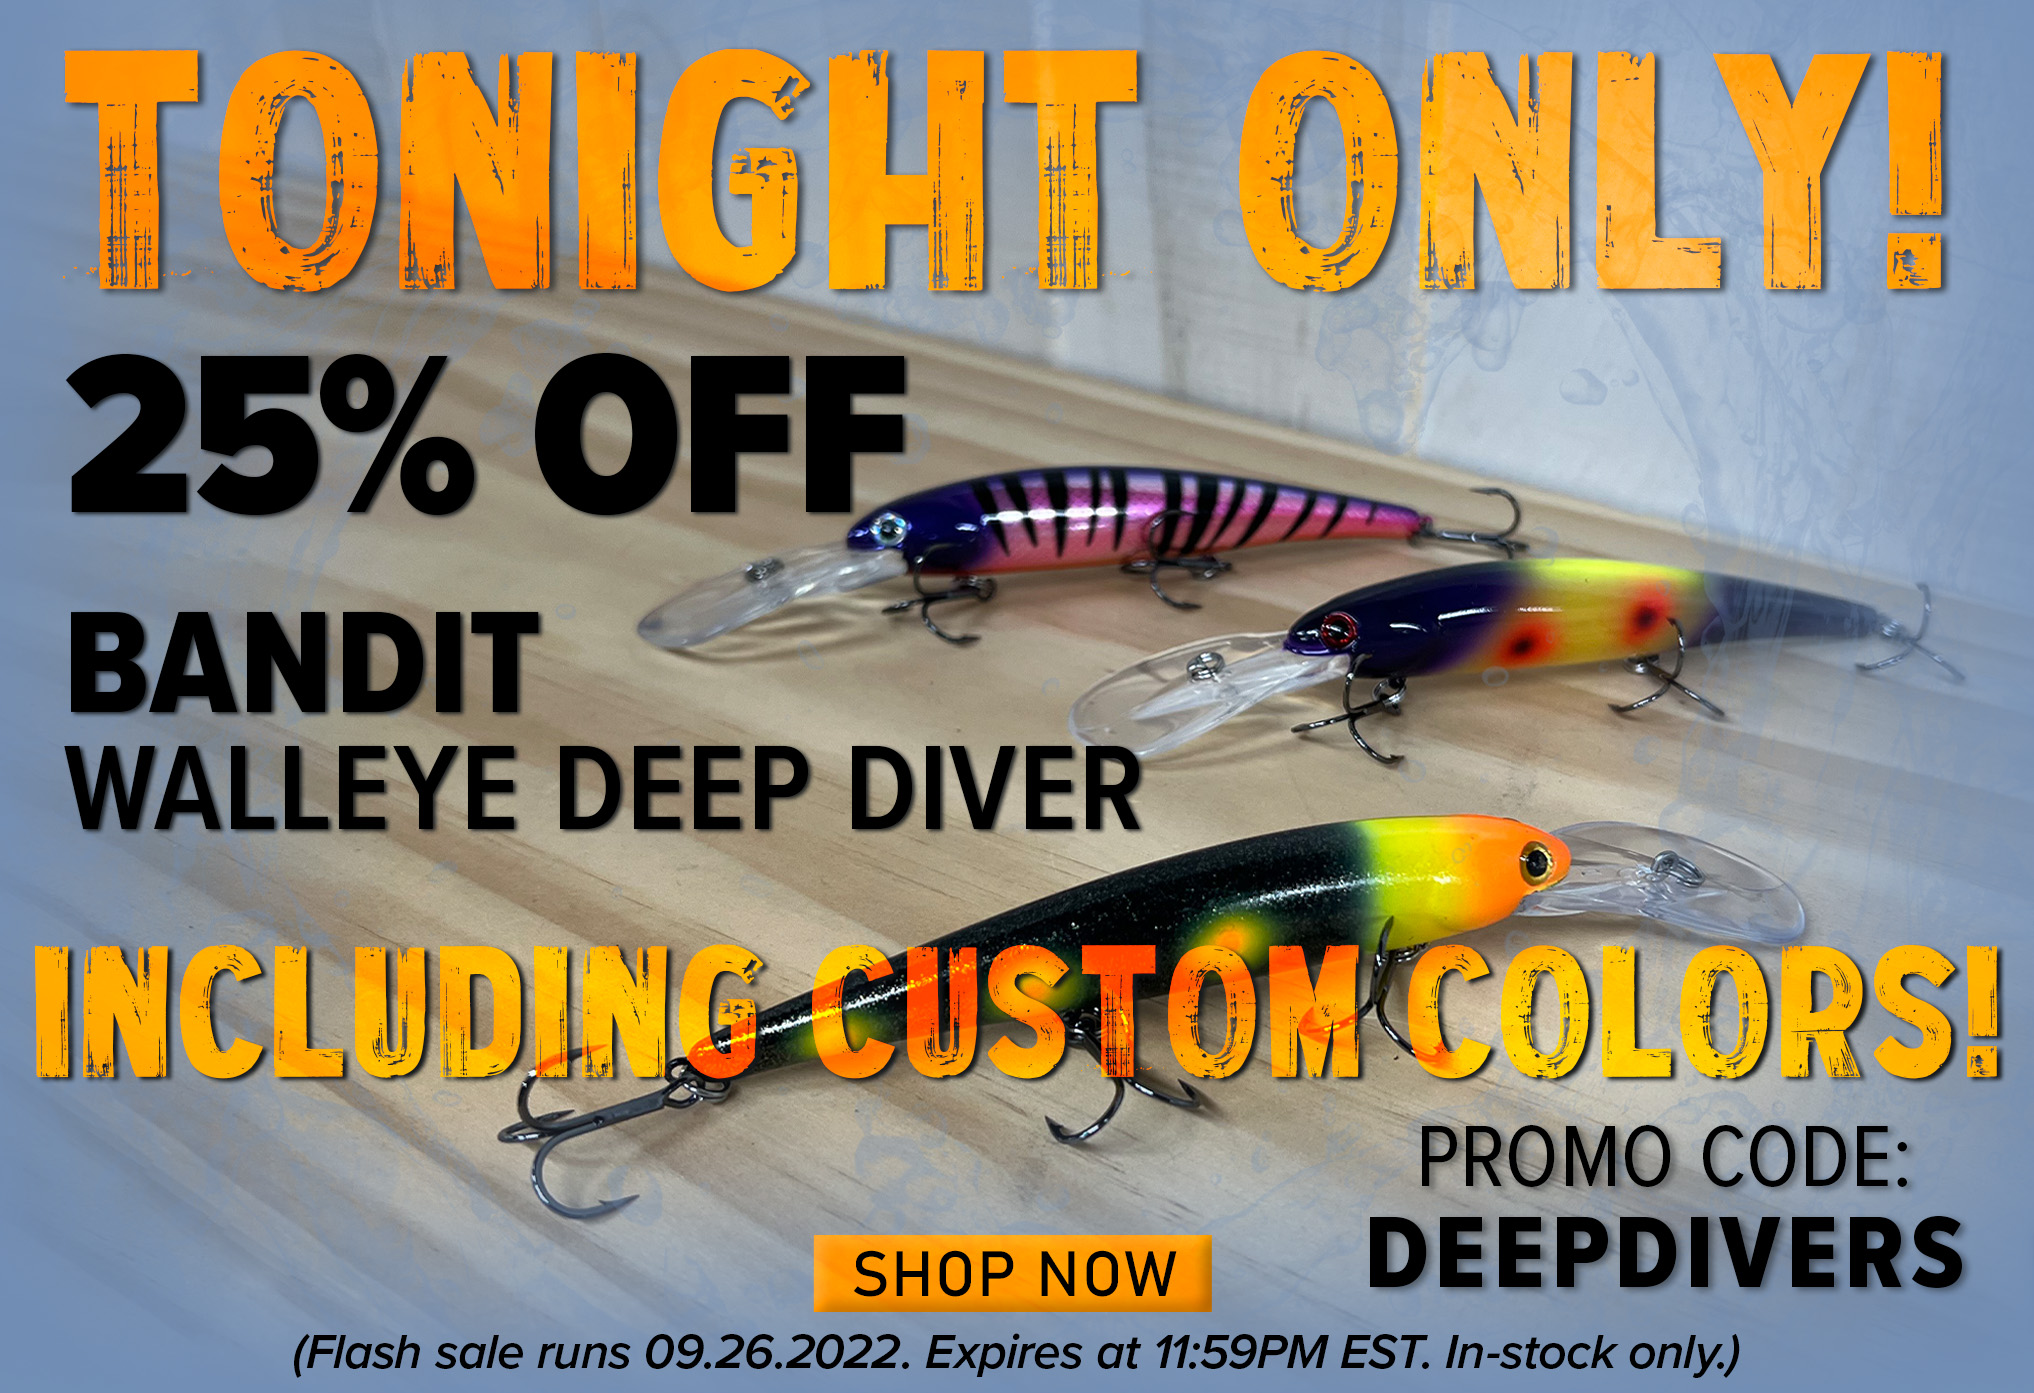 Tonight Only! 25% Off Bandit Walleye Deep Diver Including Custom Colors Promo Code: DEEPDIVERS Shop Now (Flash sale runs 09.26.2022. Expires at 11:59PM EST. In-stock only.)